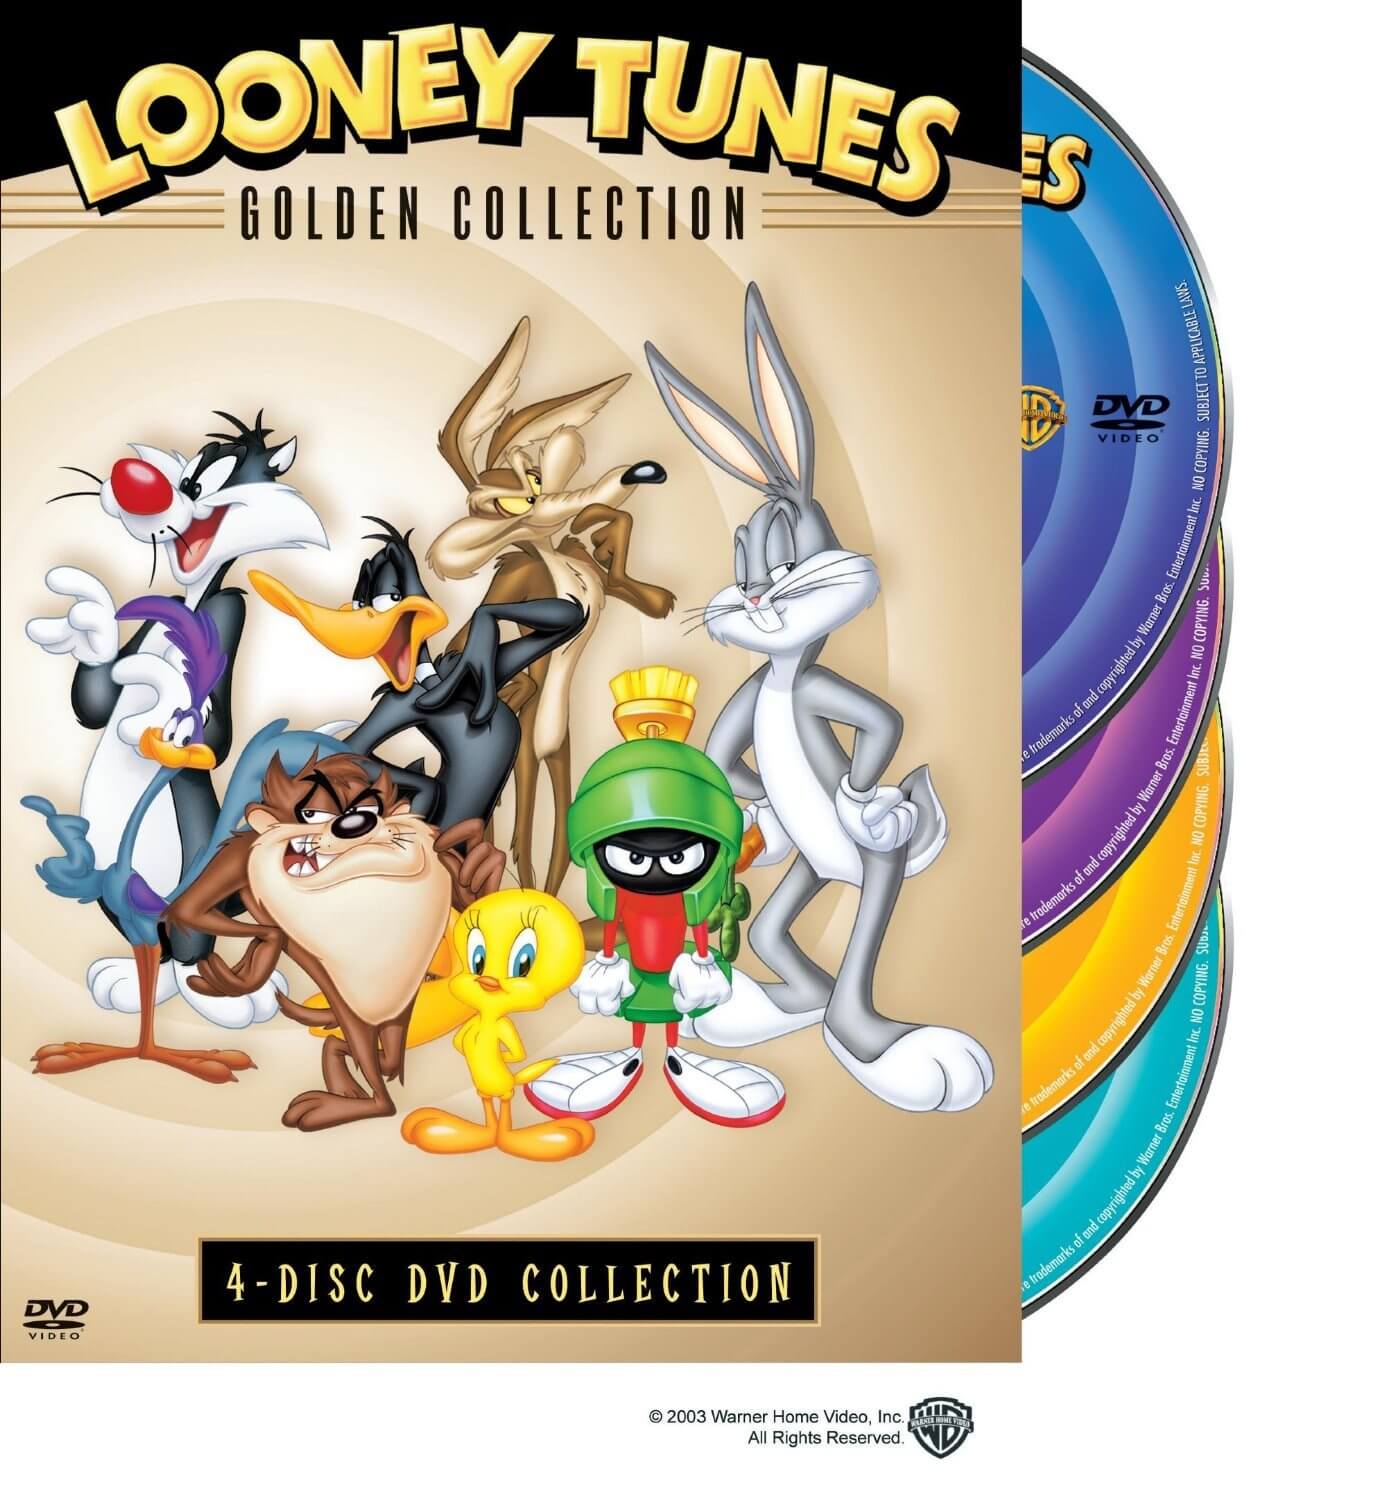 "Looney Tunes" Golden Collection